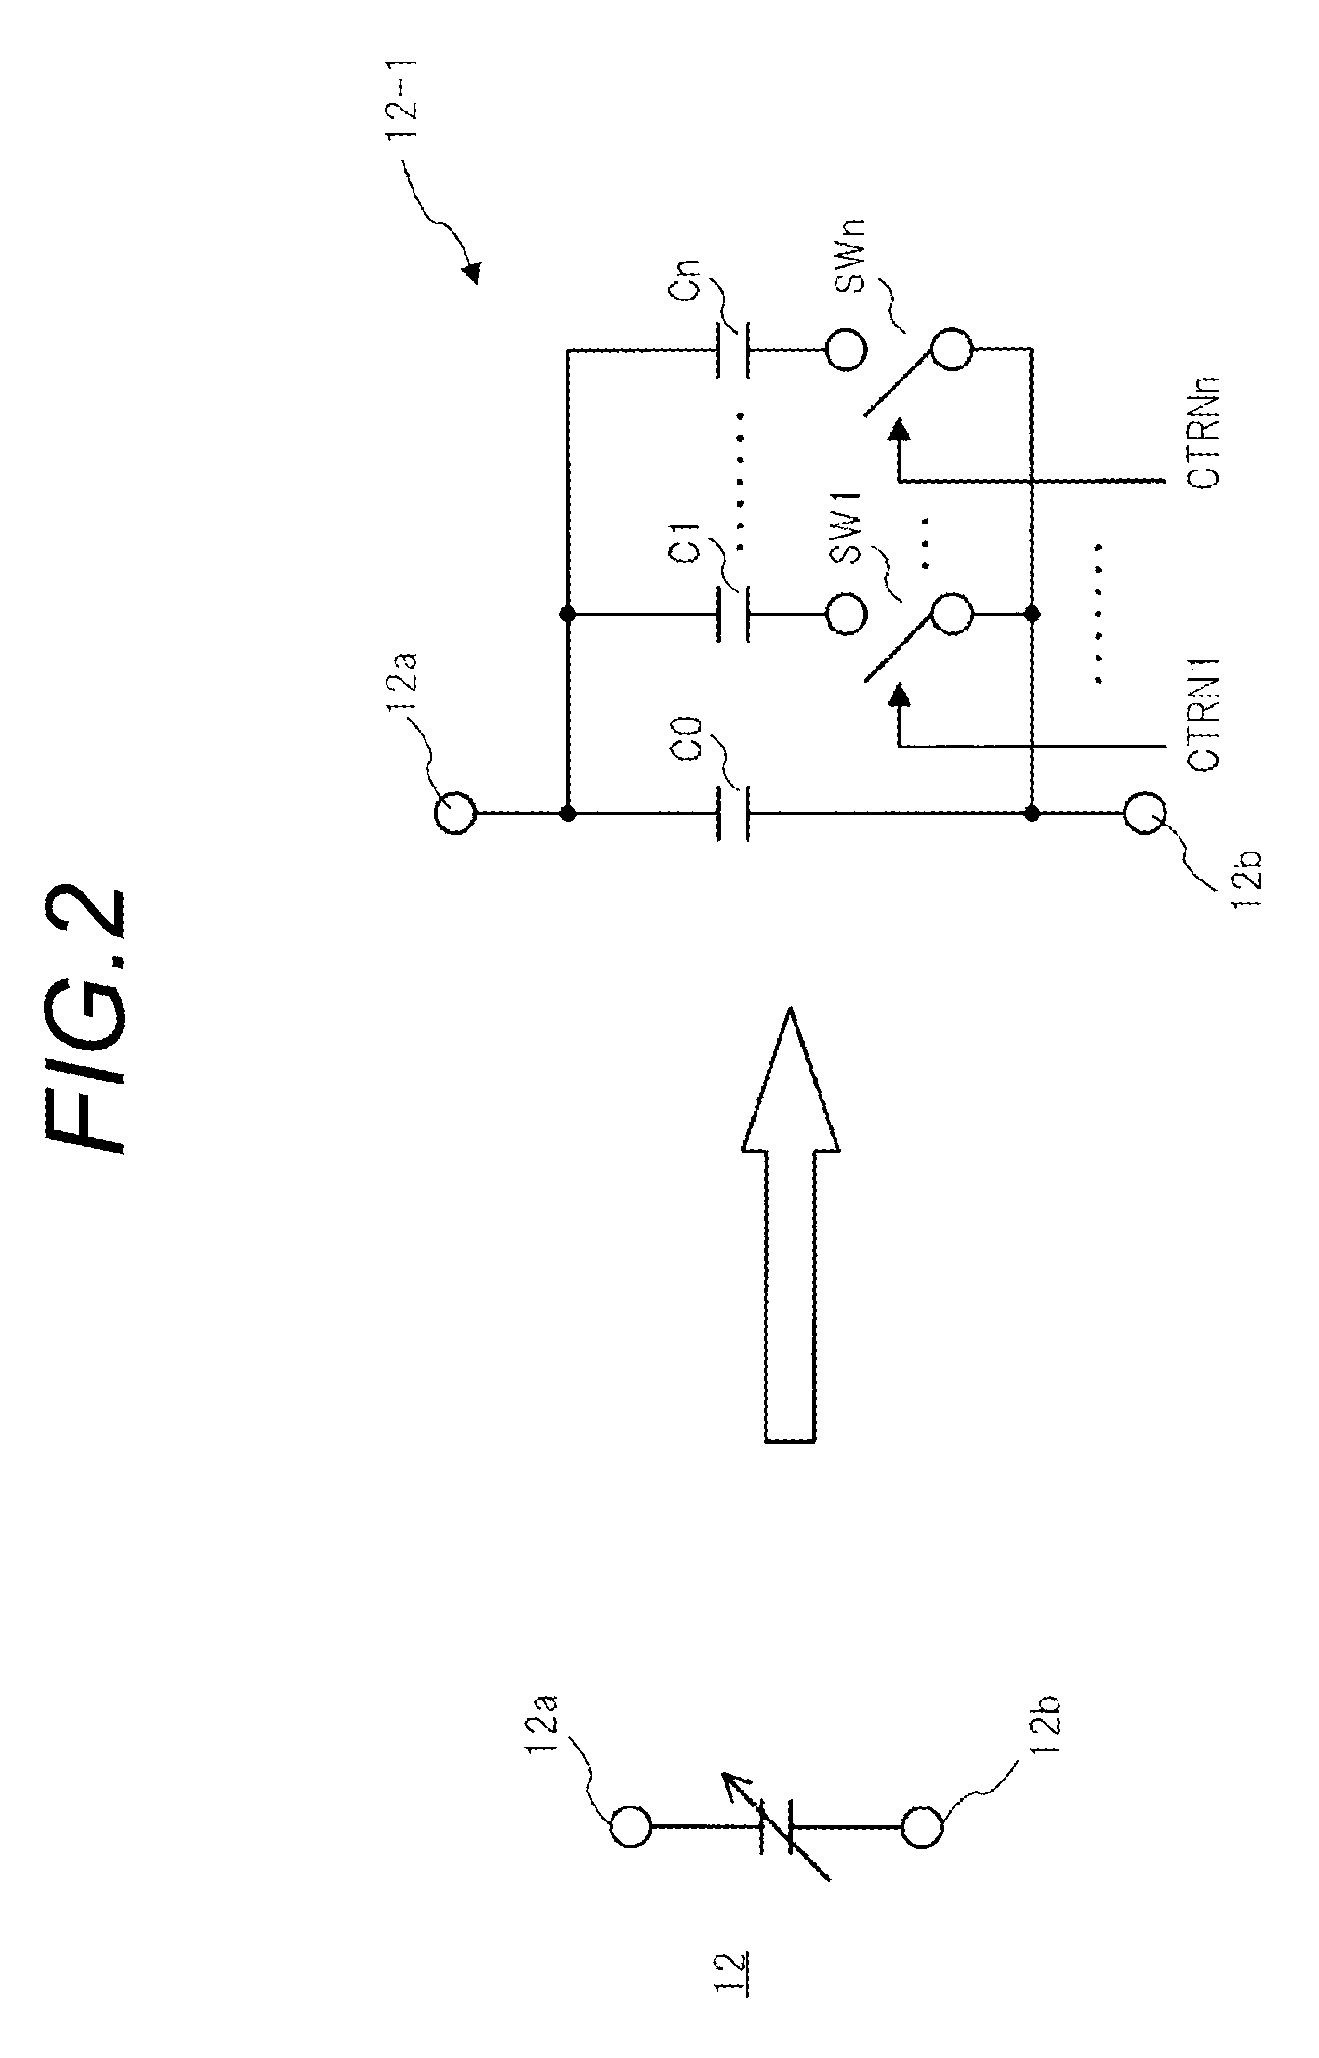 Variable matching circuit and amplifier